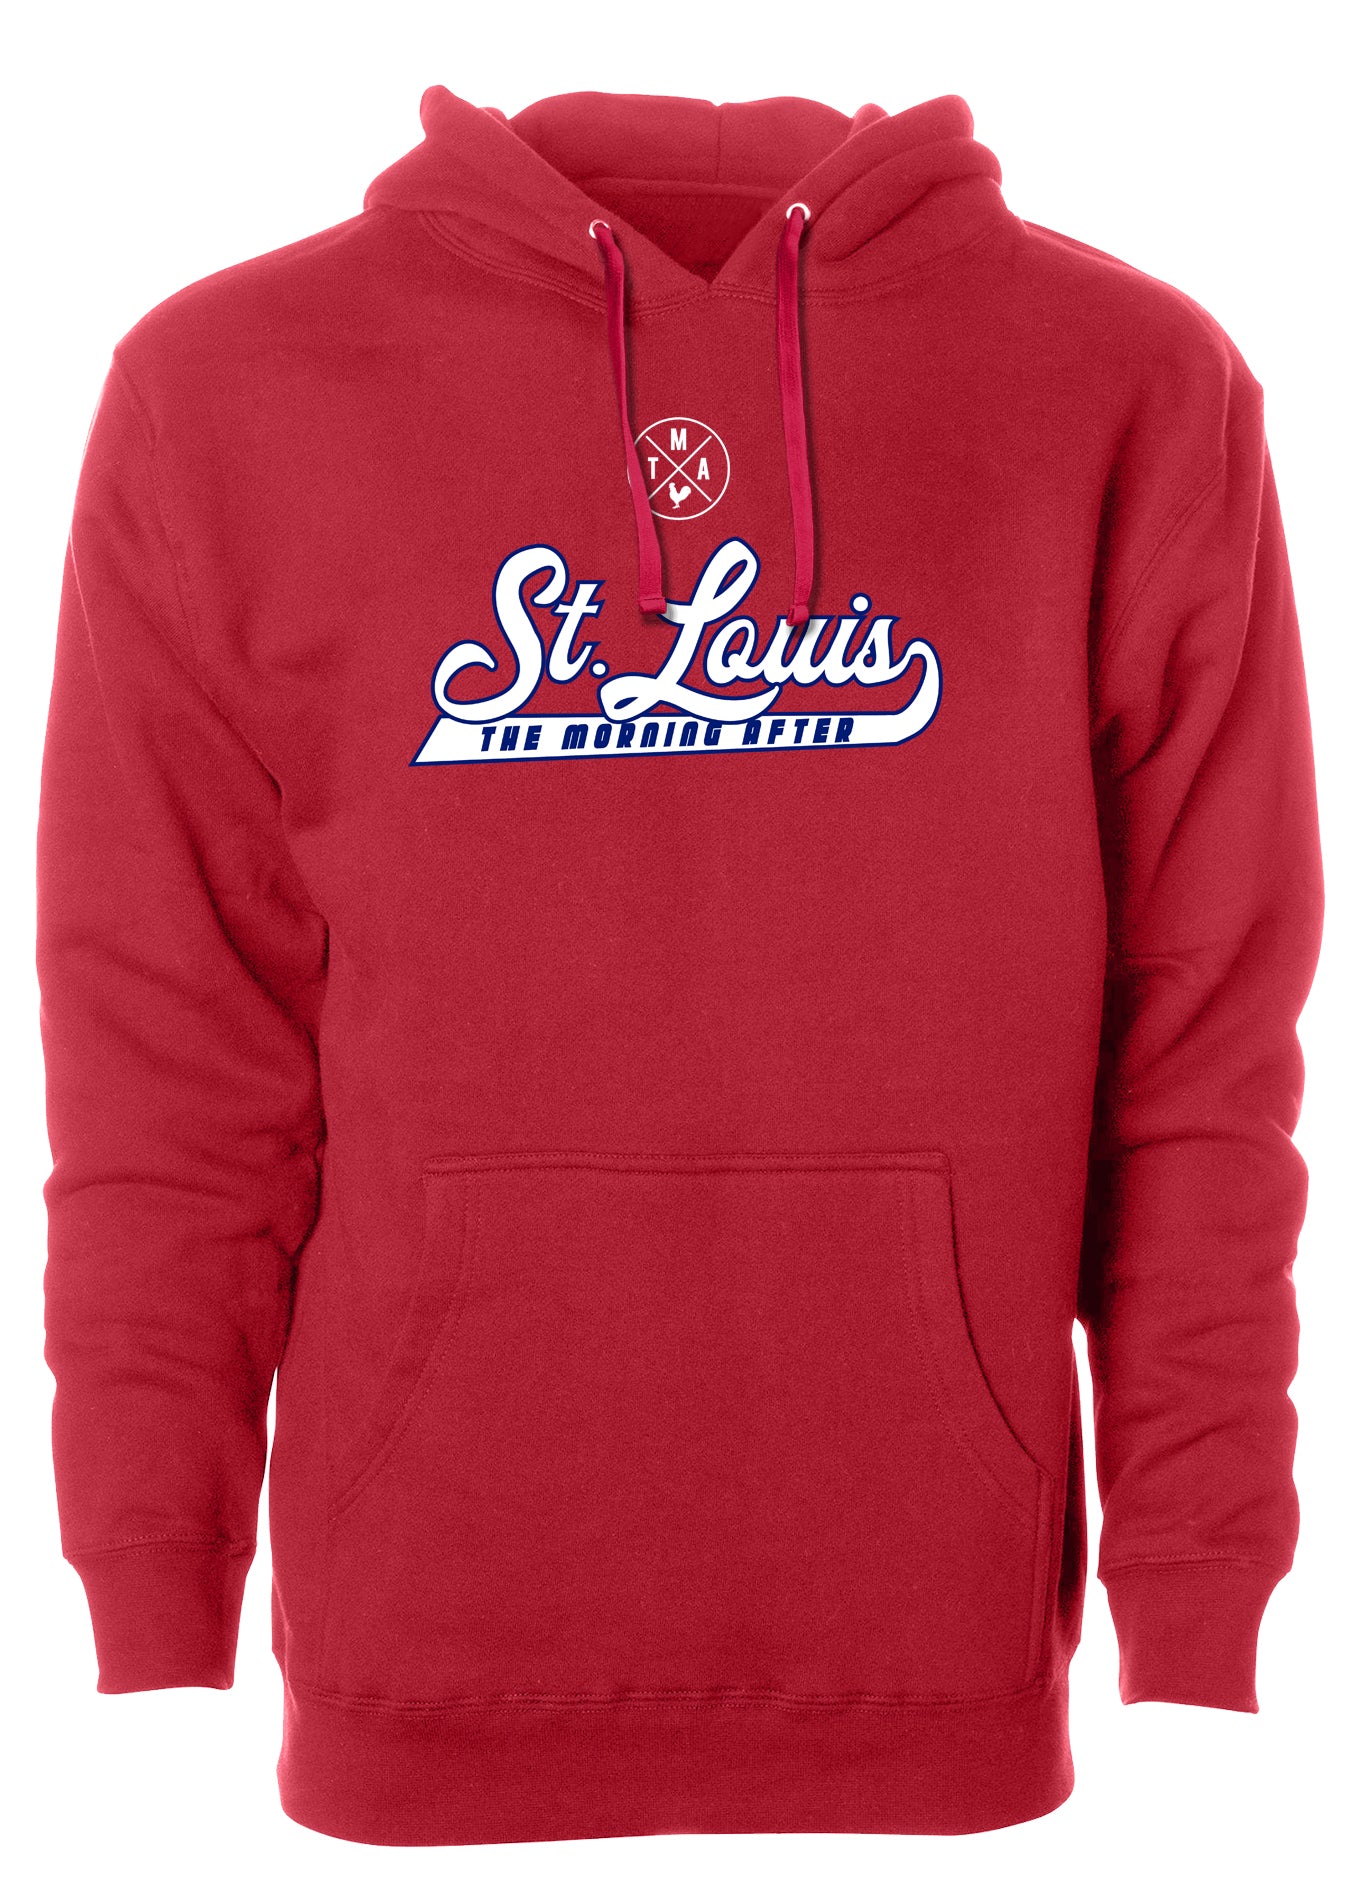 TMA STL The Morning After St. Louis Saint Hoodie Script Cardinals Baseball Red White Classic Style